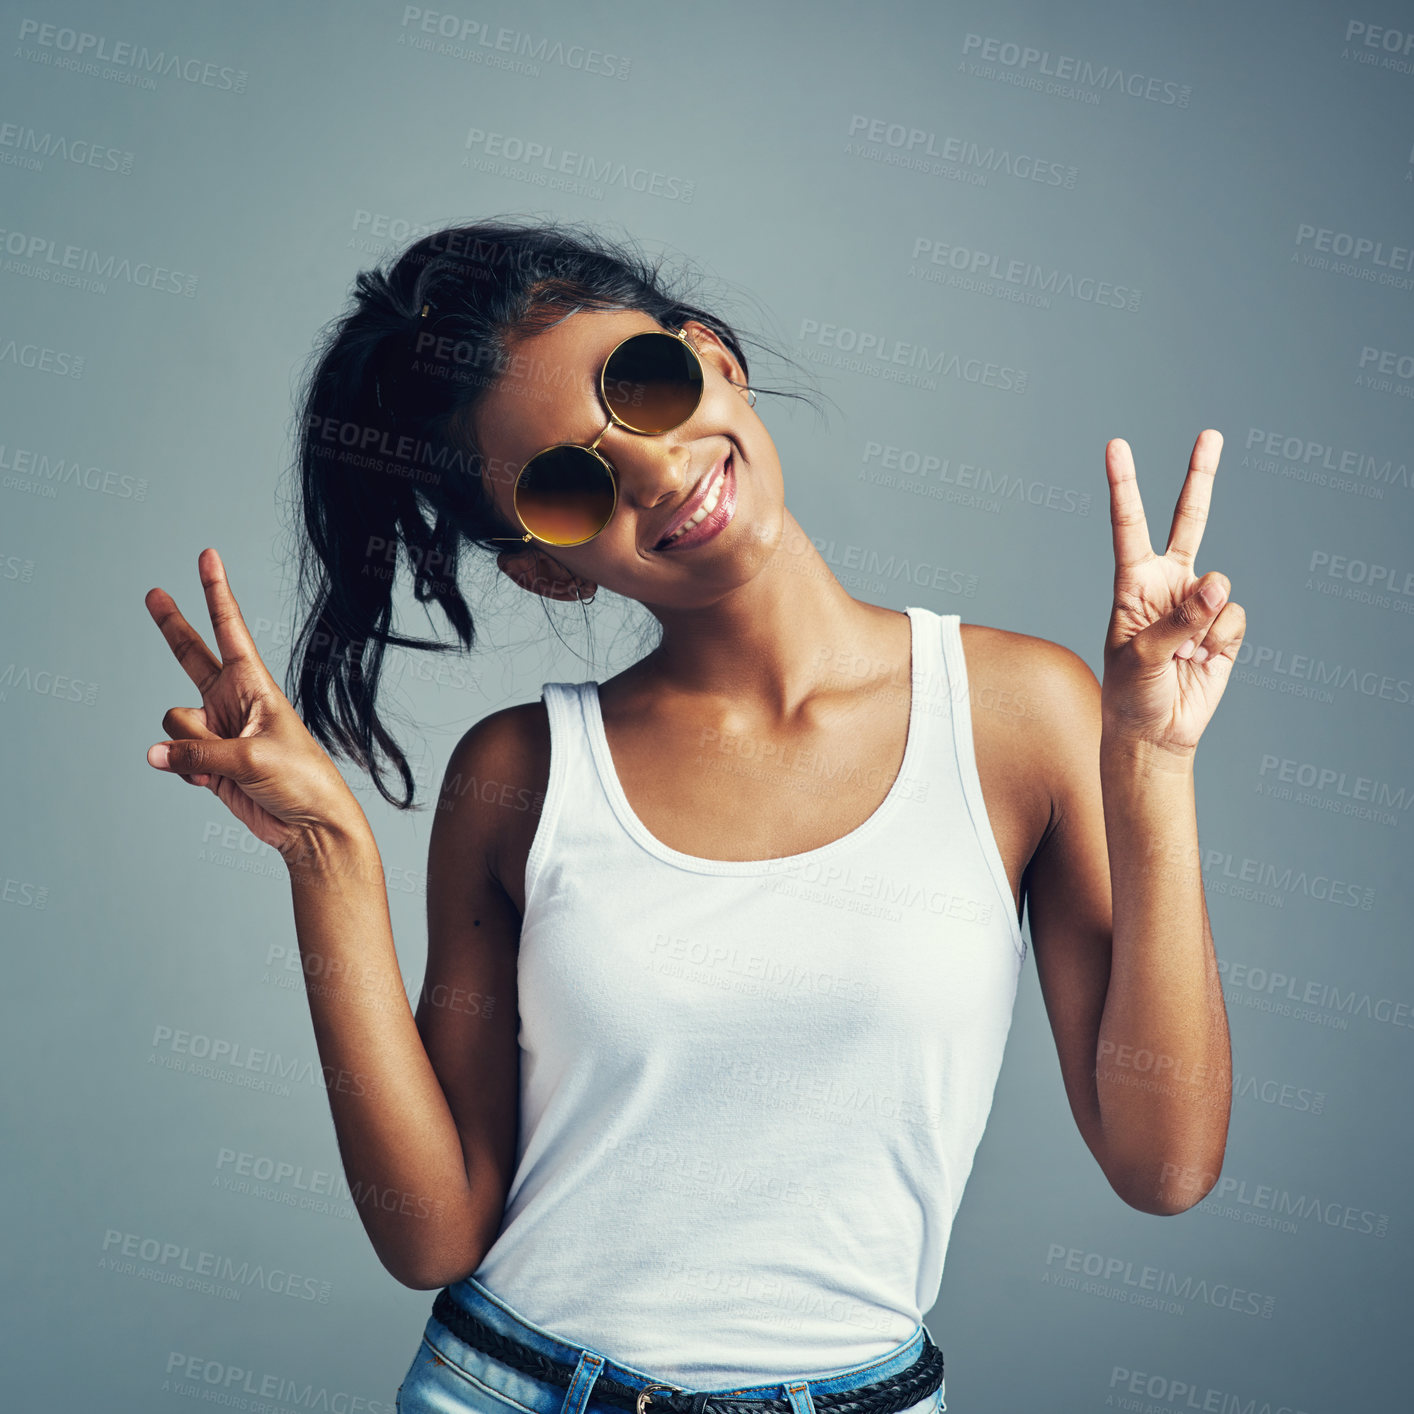 Buy stock photo Studio portrait of a beautiful young woman giving you two peace signs against a grey background